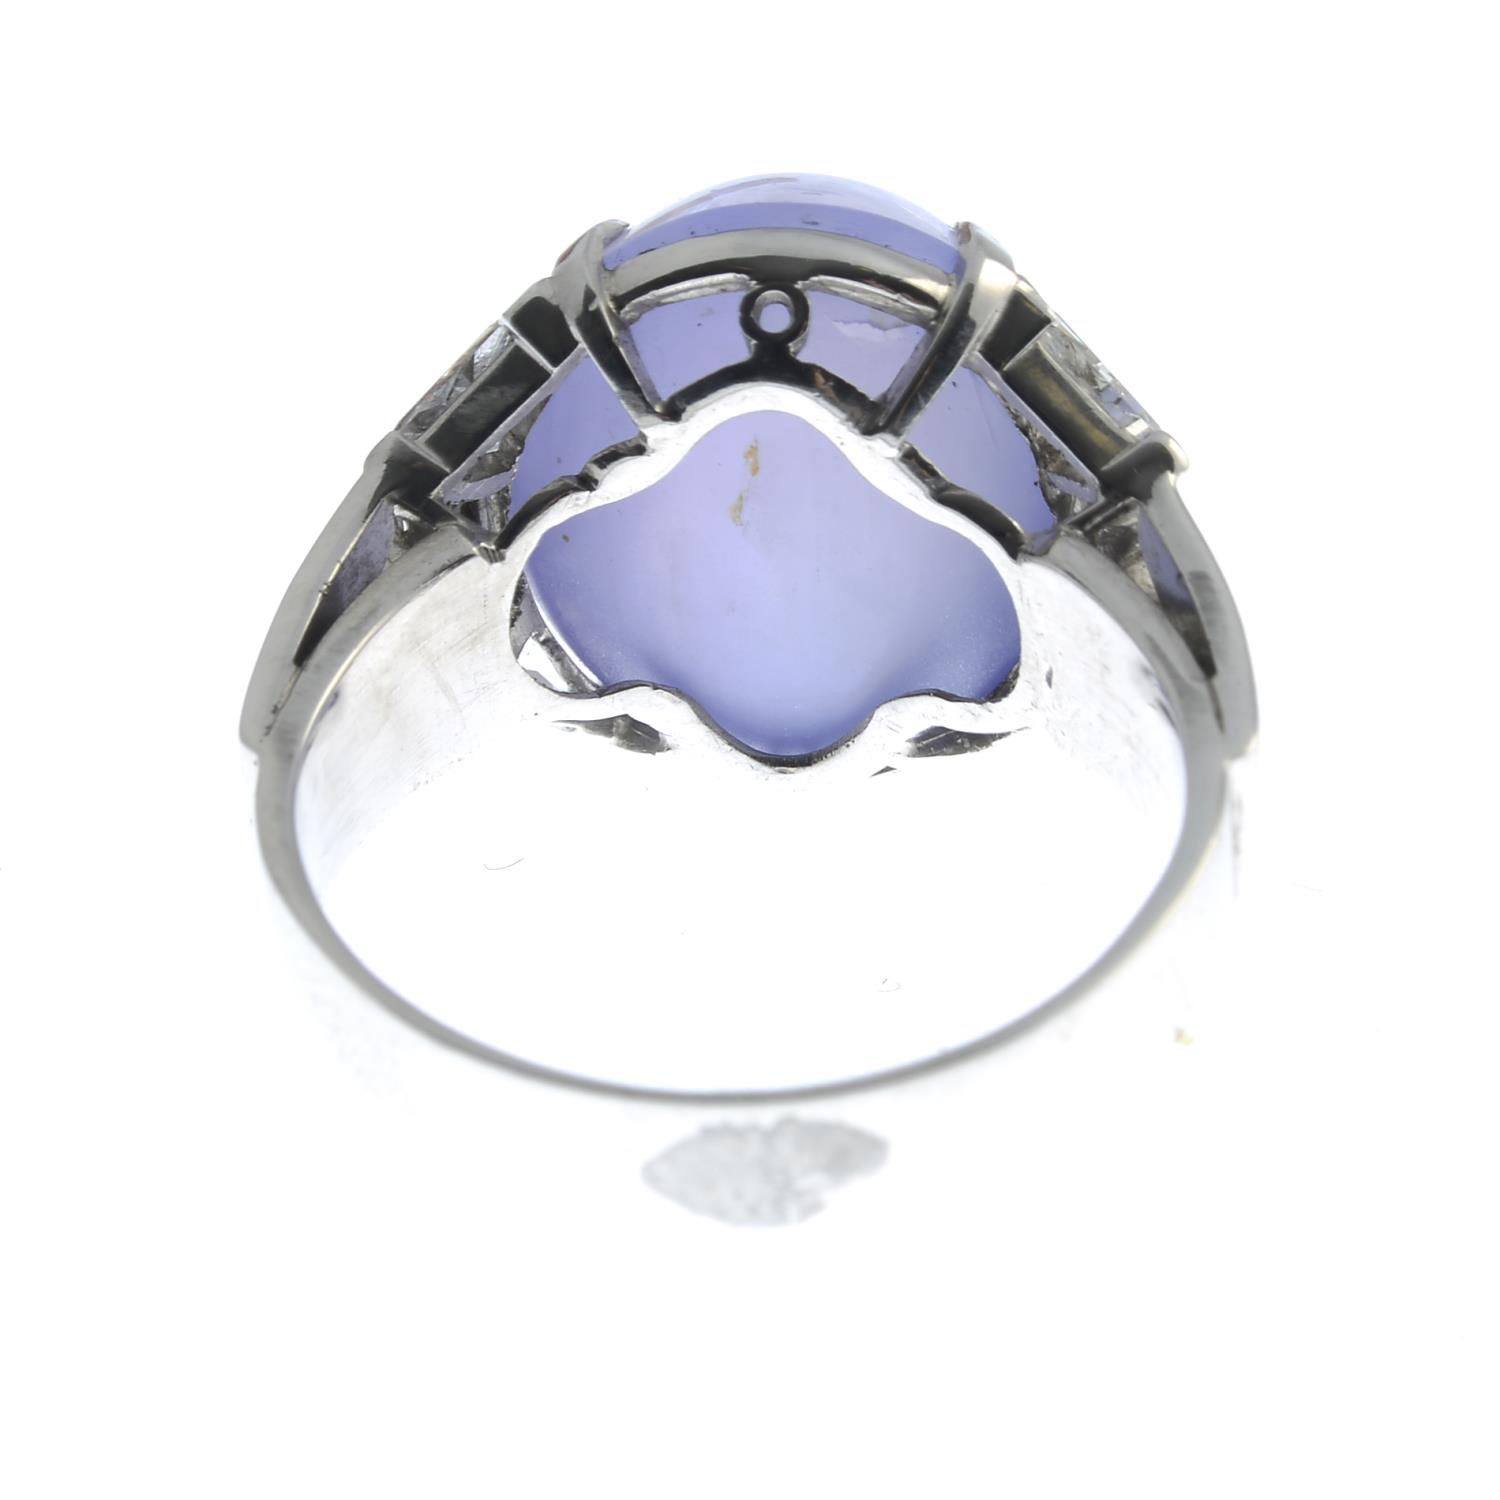 A star sapphire cabochon ring, with vari-cut diamond shoulders. - Image 2 of 6